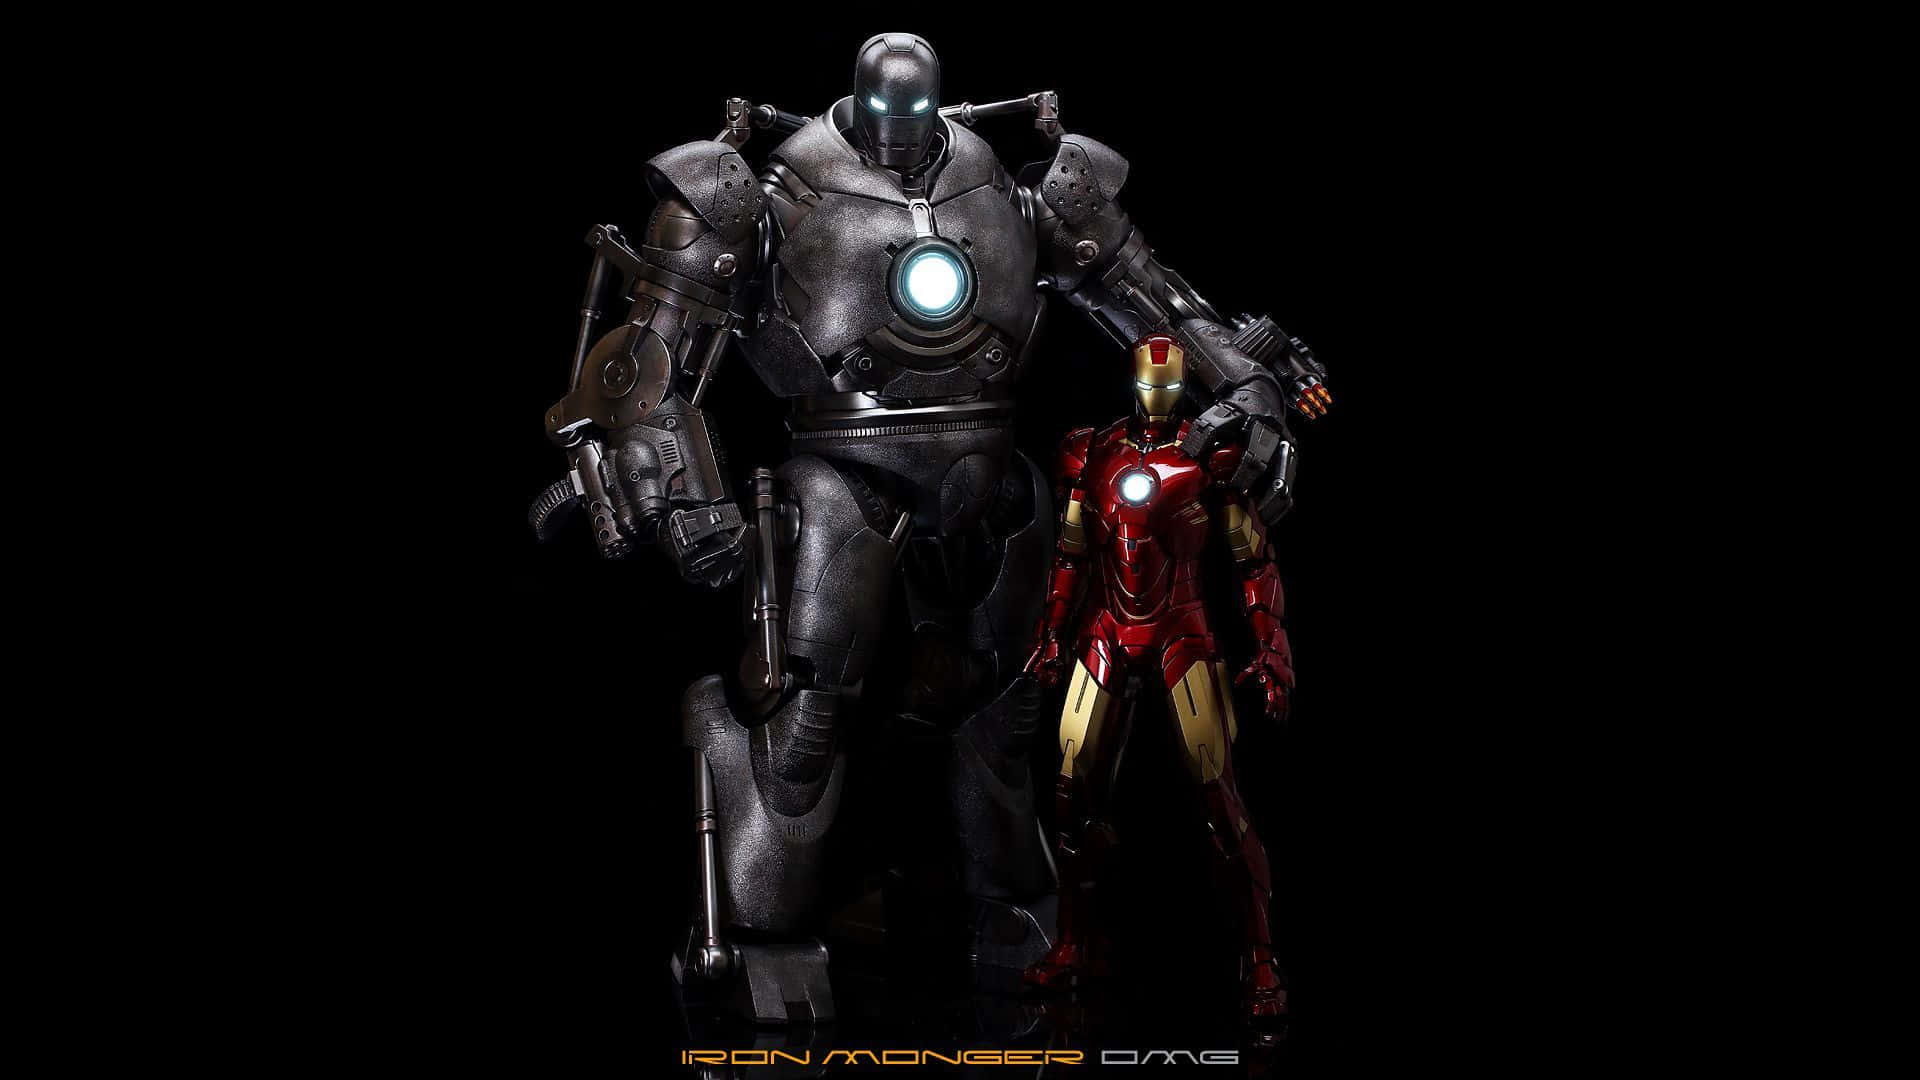 Iron Monger stands formidable in the shadows Wallpaper